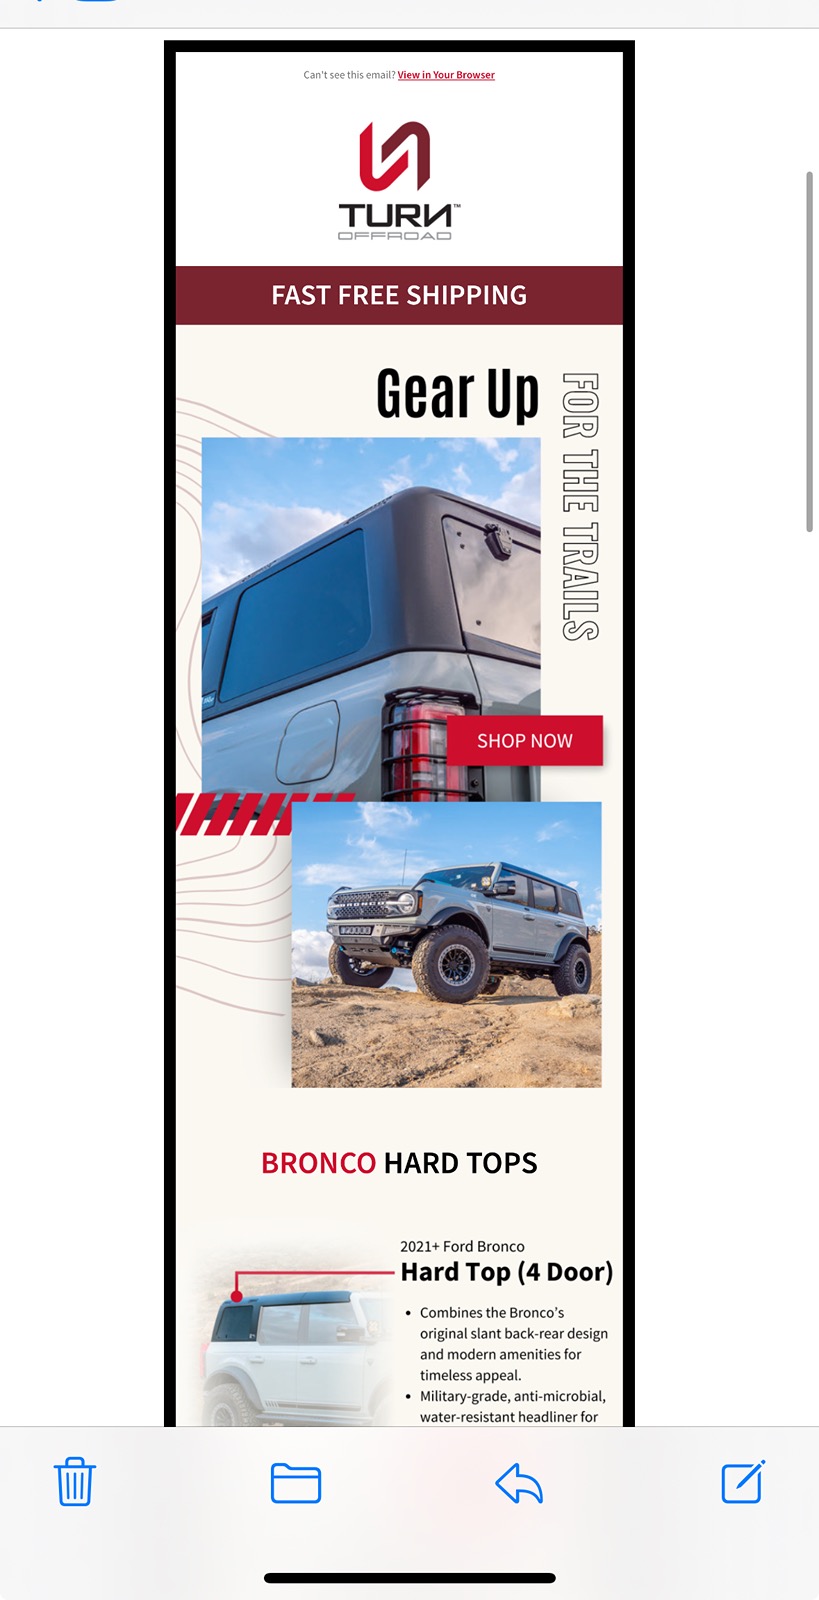 Ford Bronco Turn Offroad | Aftermarket Hard Top NOW AVAILABLE IMG_3741